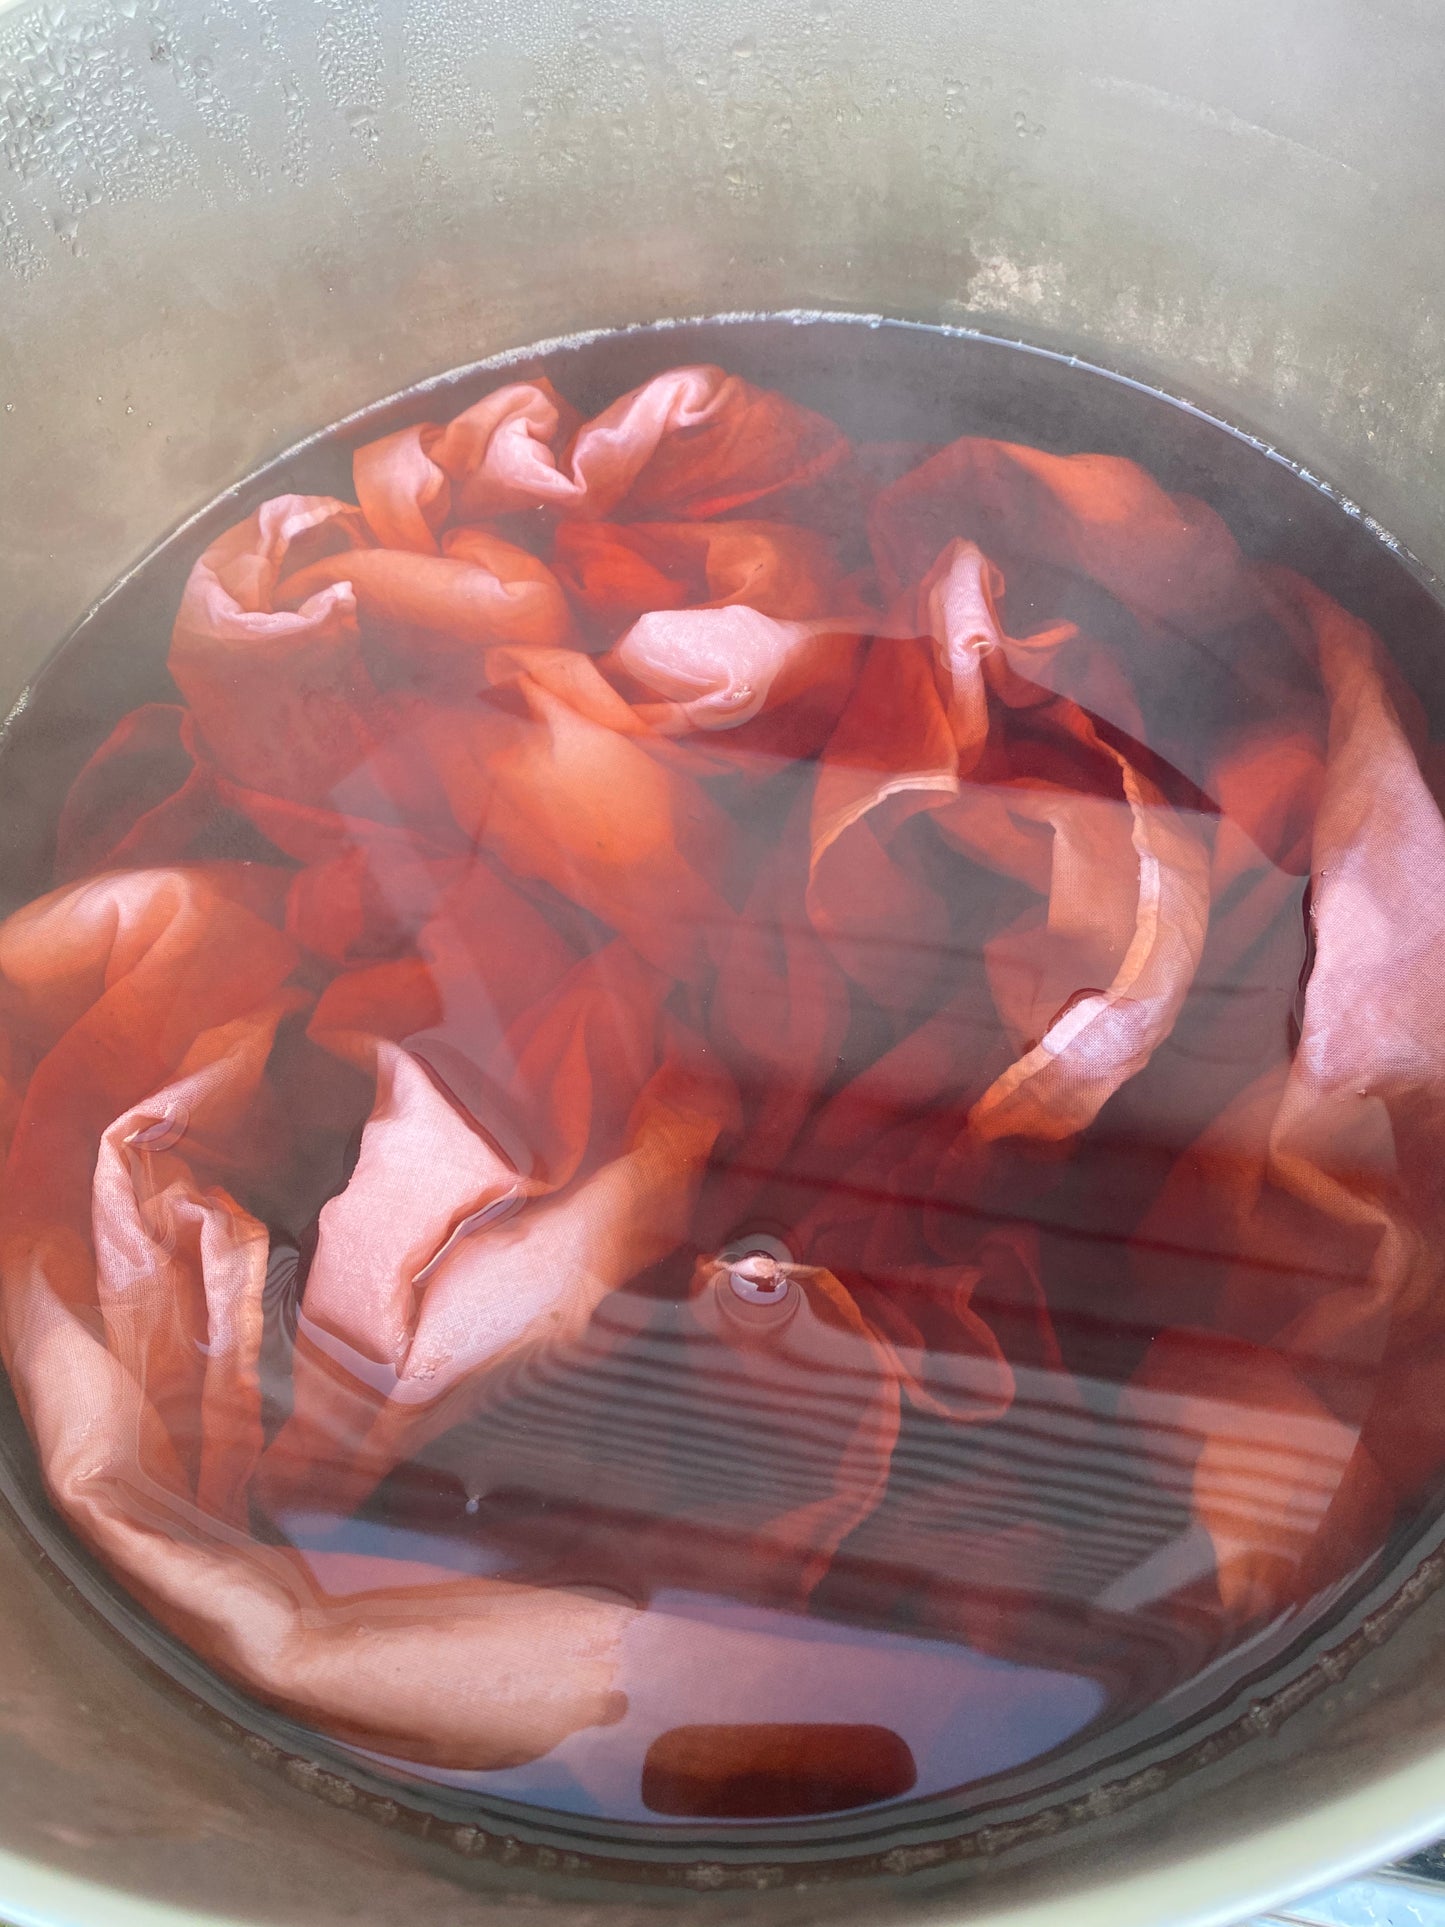 Natural Dyes with Kitchen Scraps with Jamie Lyn Kara | May 19, 1-3:30pm at Troutbeck